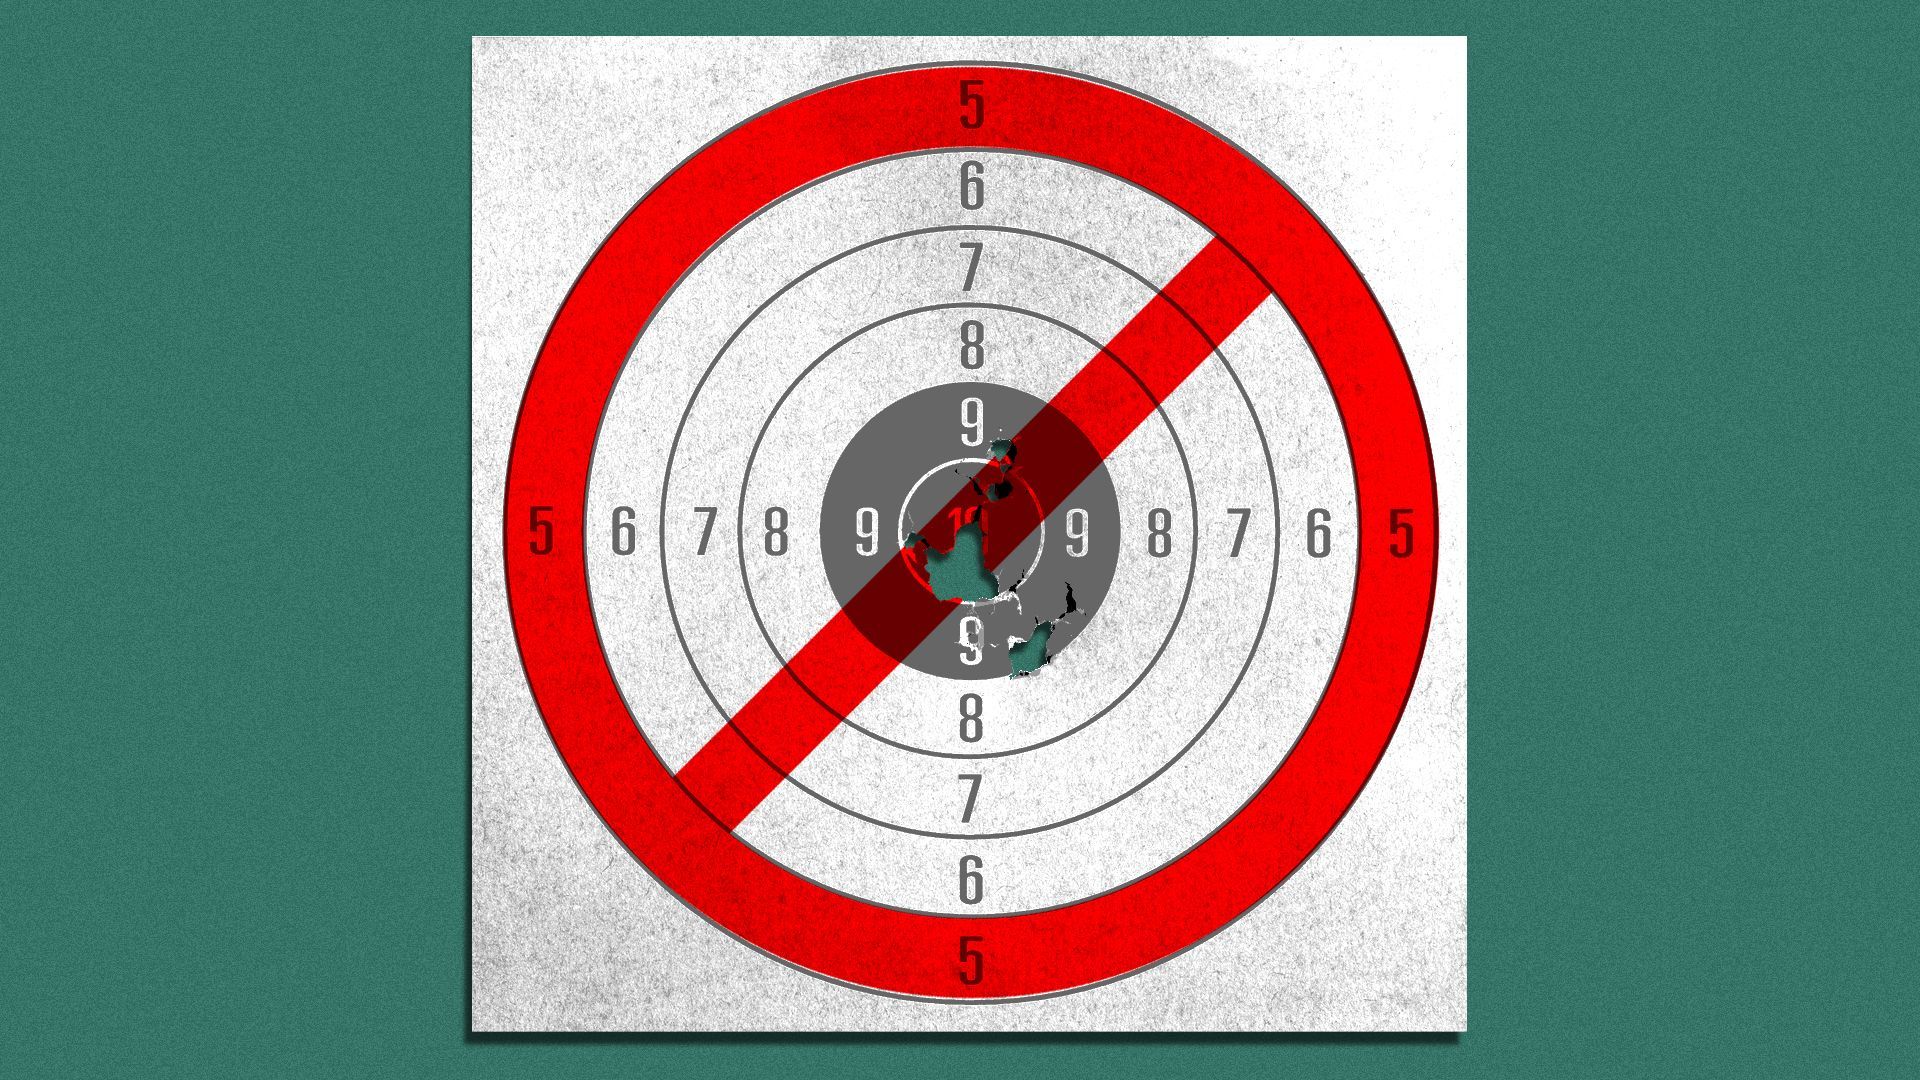 Illustration of a paper gun target with a "no" or "banned" symbol in the middle